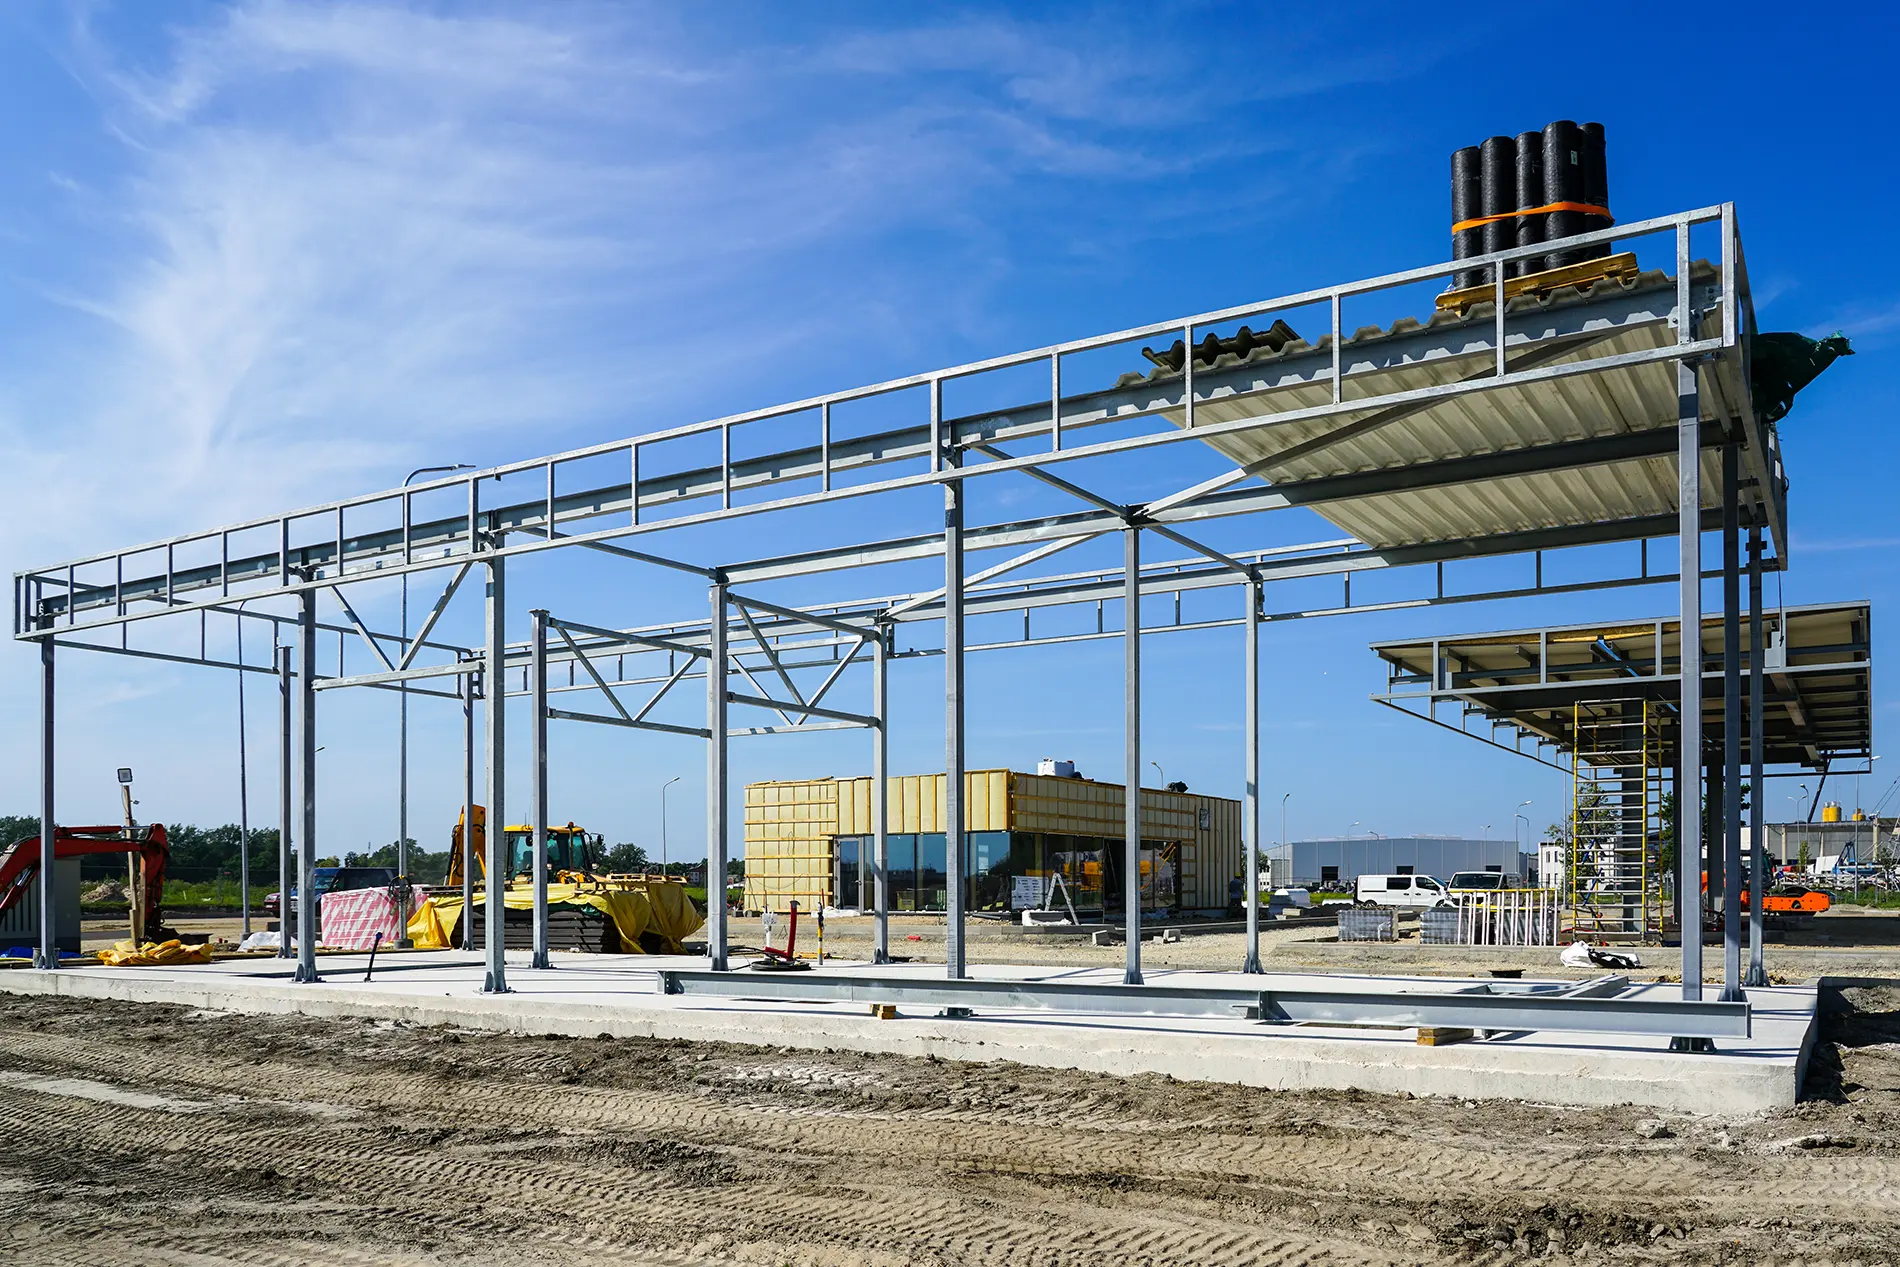 Active construction site of a new c-store and travel center in the Southeastern US where Apex provided regulatory compliance support services.